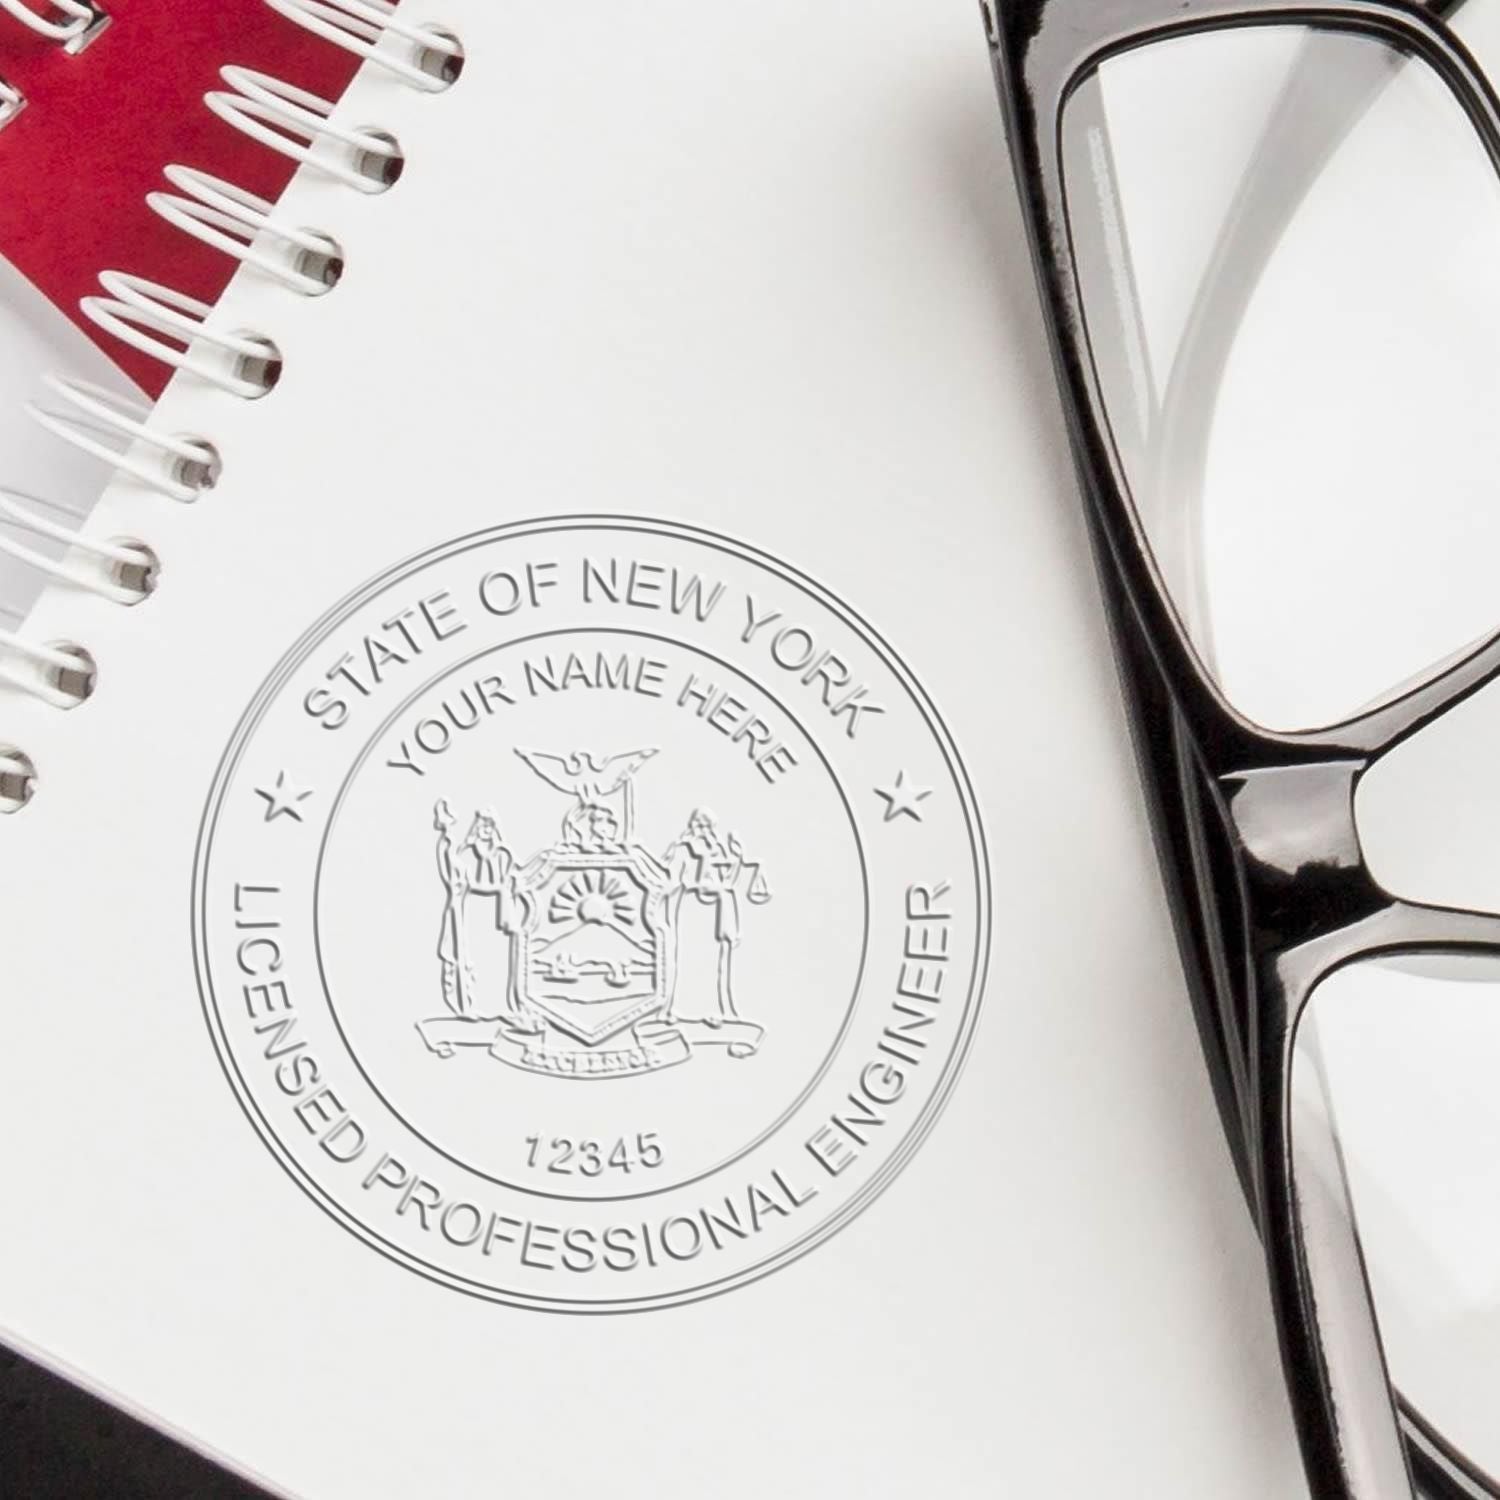 A photograph of the Soft New York Professional Engineer Seal stamp impression reveals a vivid, professional image of the on paper.